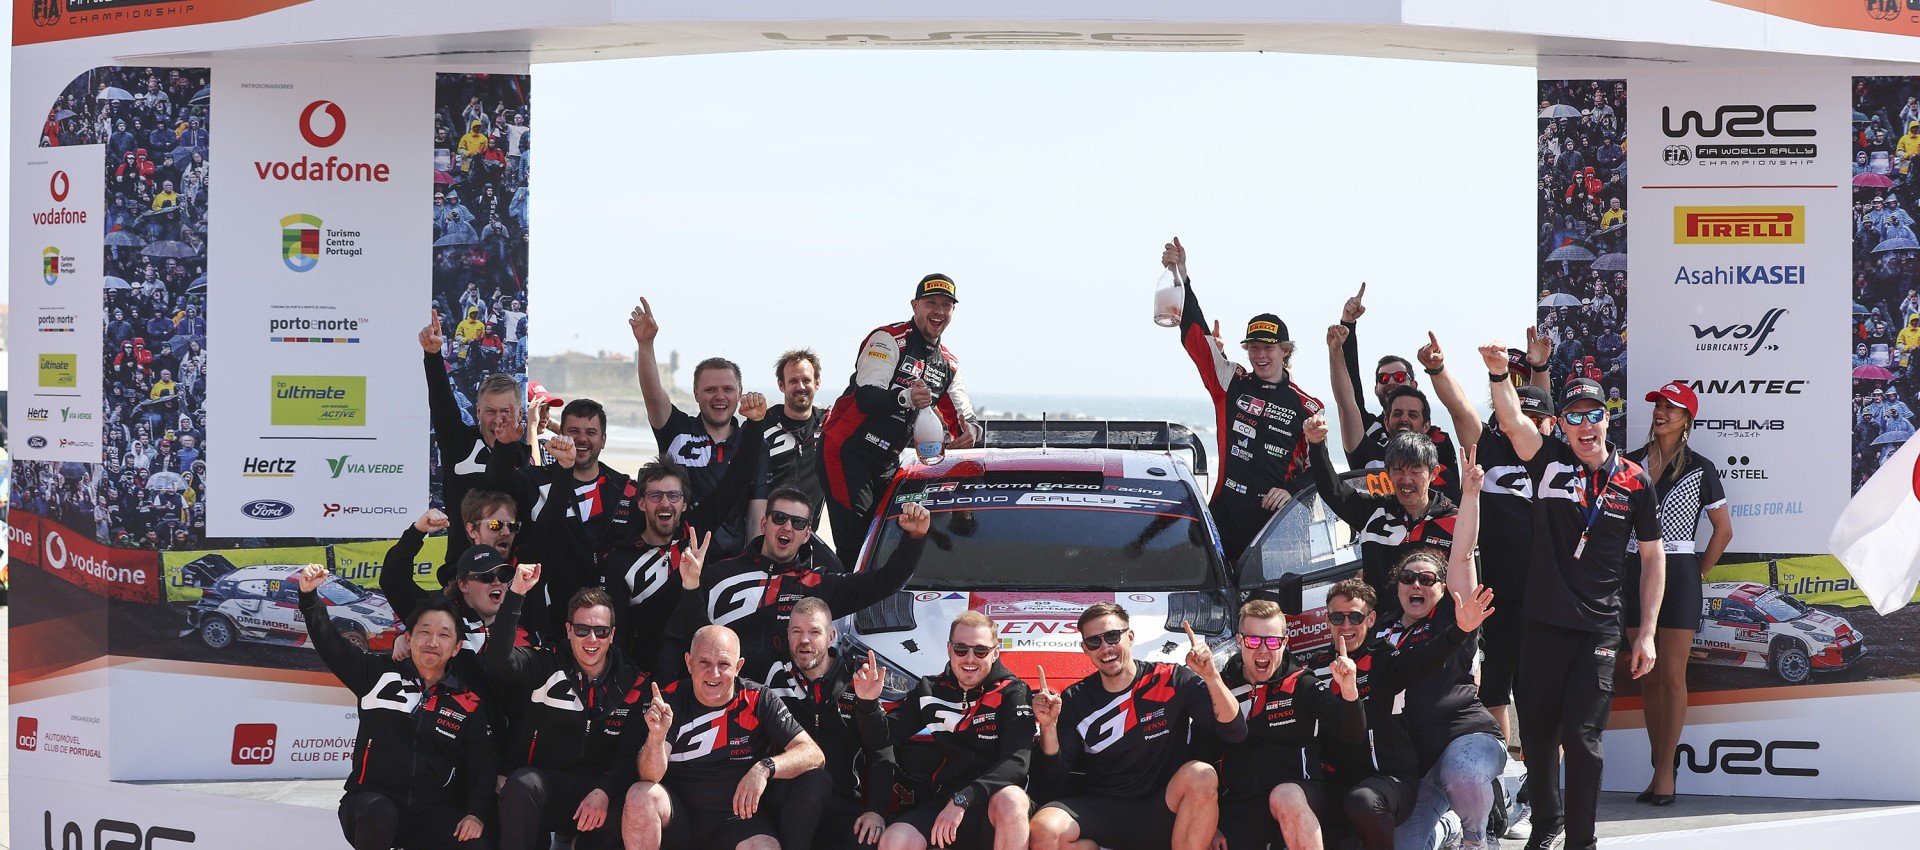 Rovamperä wins and takes world championship lead at Rally De Portugal with TOYOTA GAZOO Racing